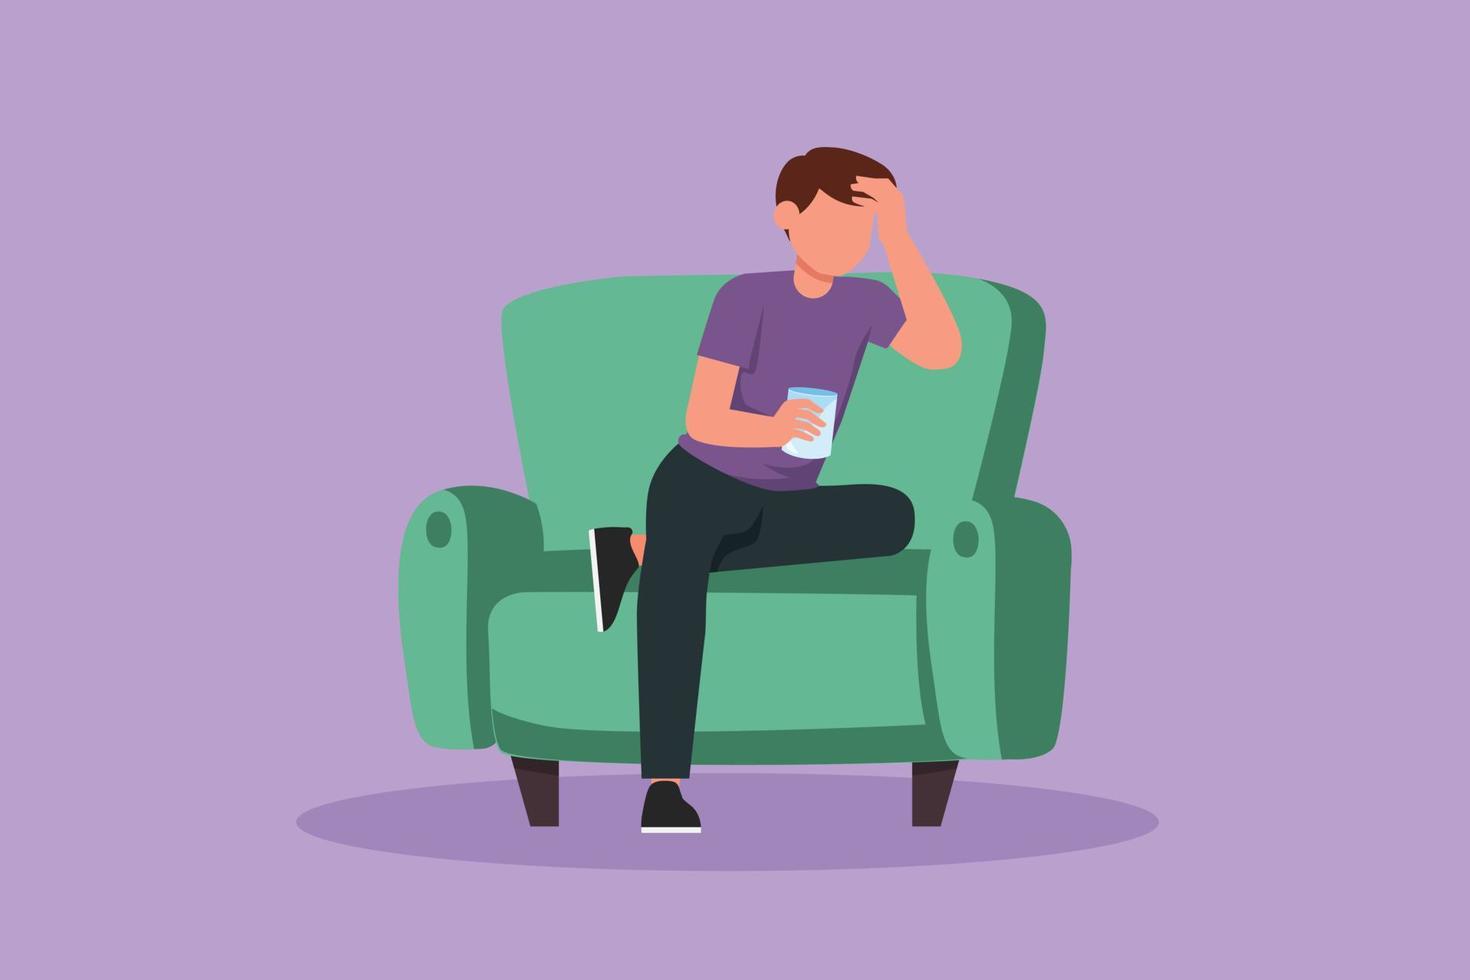 Graphic flat design drawing young man sitting on couch and resting, drinking tea. Male manager relaxing and holding a glass of coffee. Enjoying break time at office. Cartoon style vector illustration